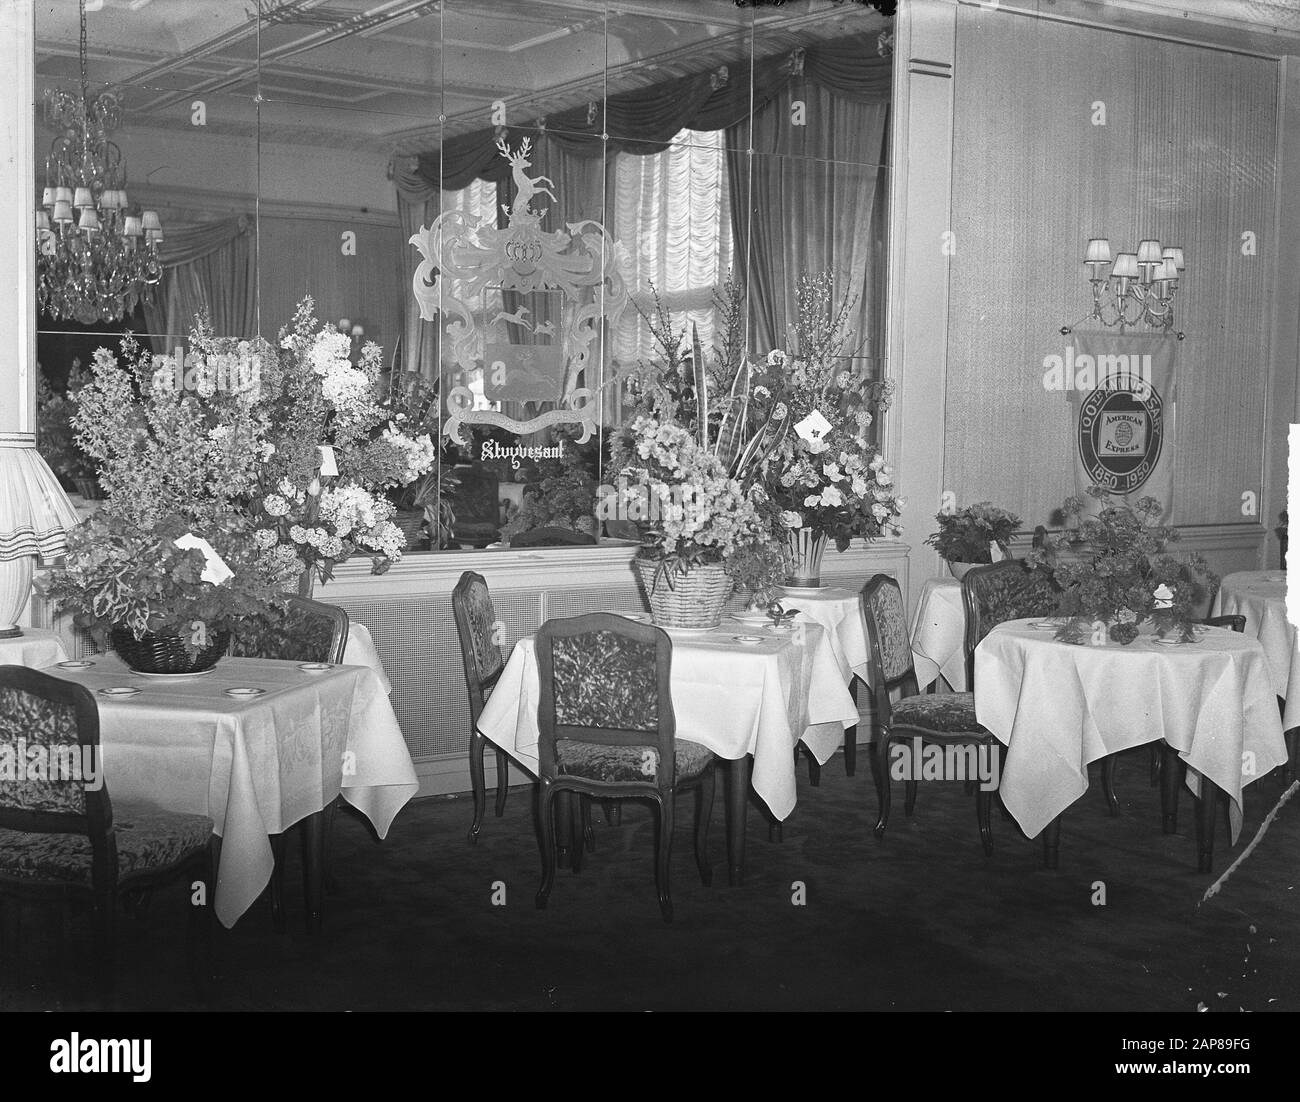 American Express reception flowers Date: March 18, 1950 Keywords: FLOWERS, receptions Stock Photo